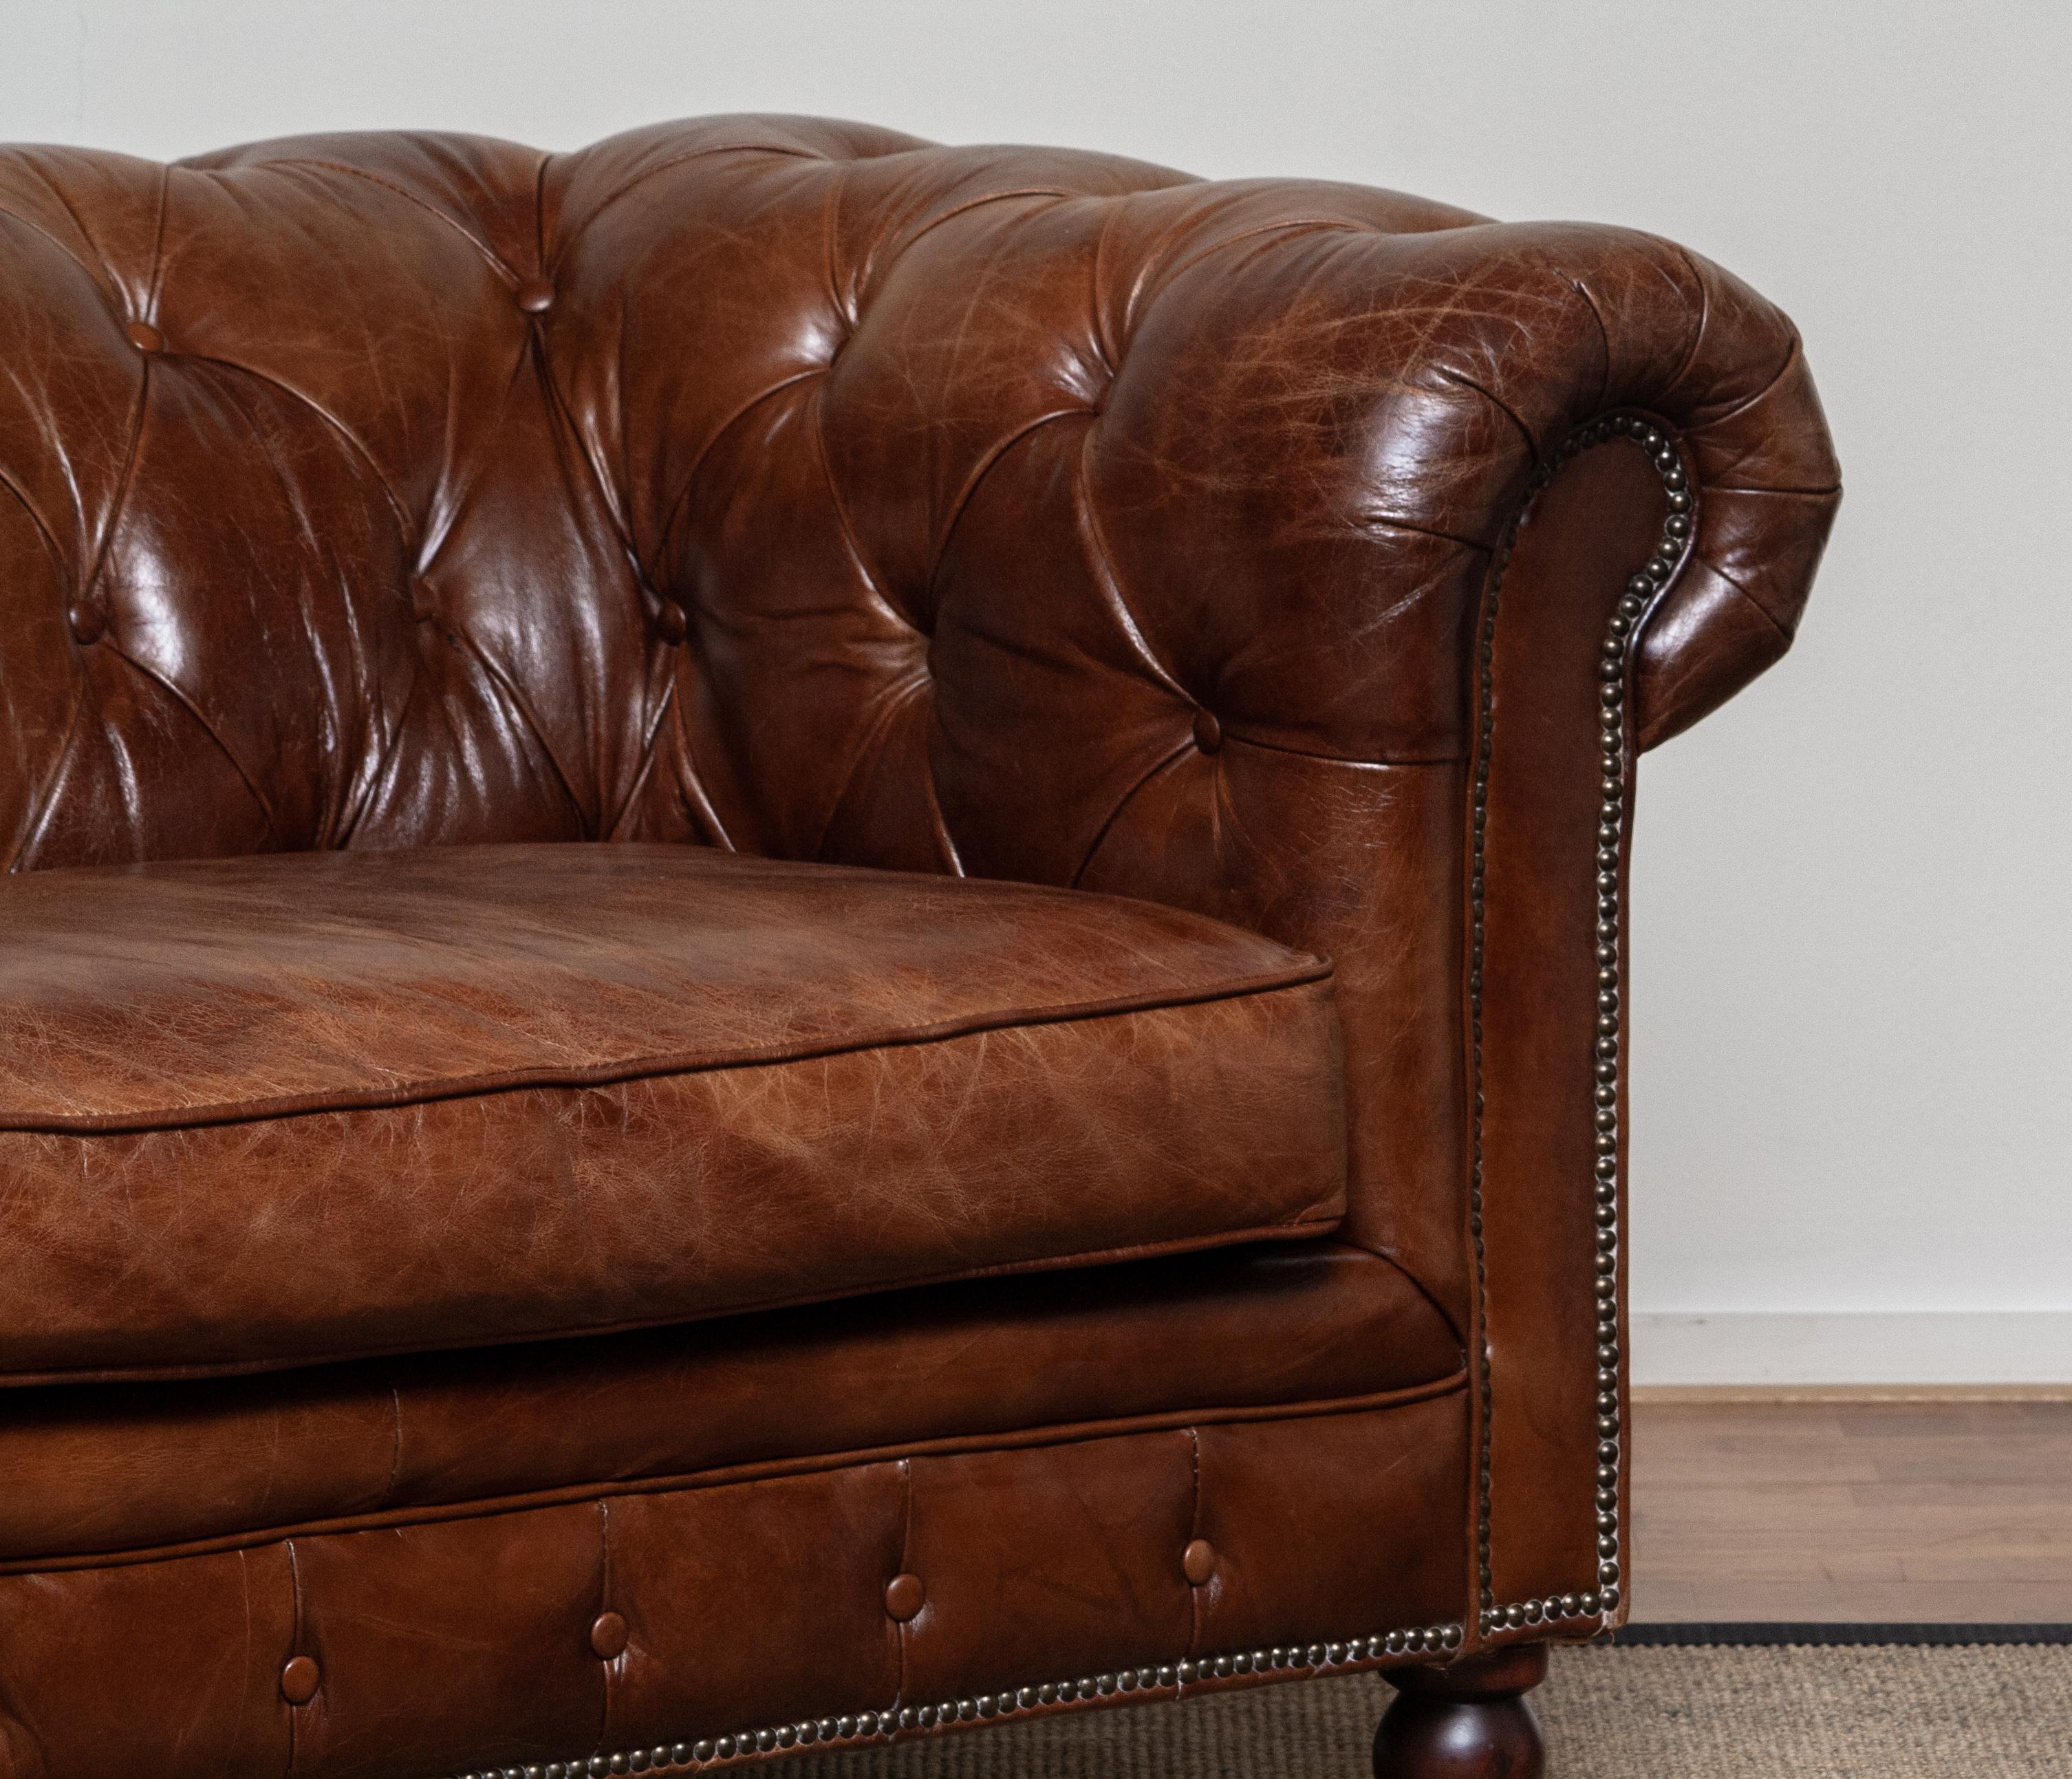 Tufted Brown Leather Chesterfield Sofa and Arm / Lounge Chair 9